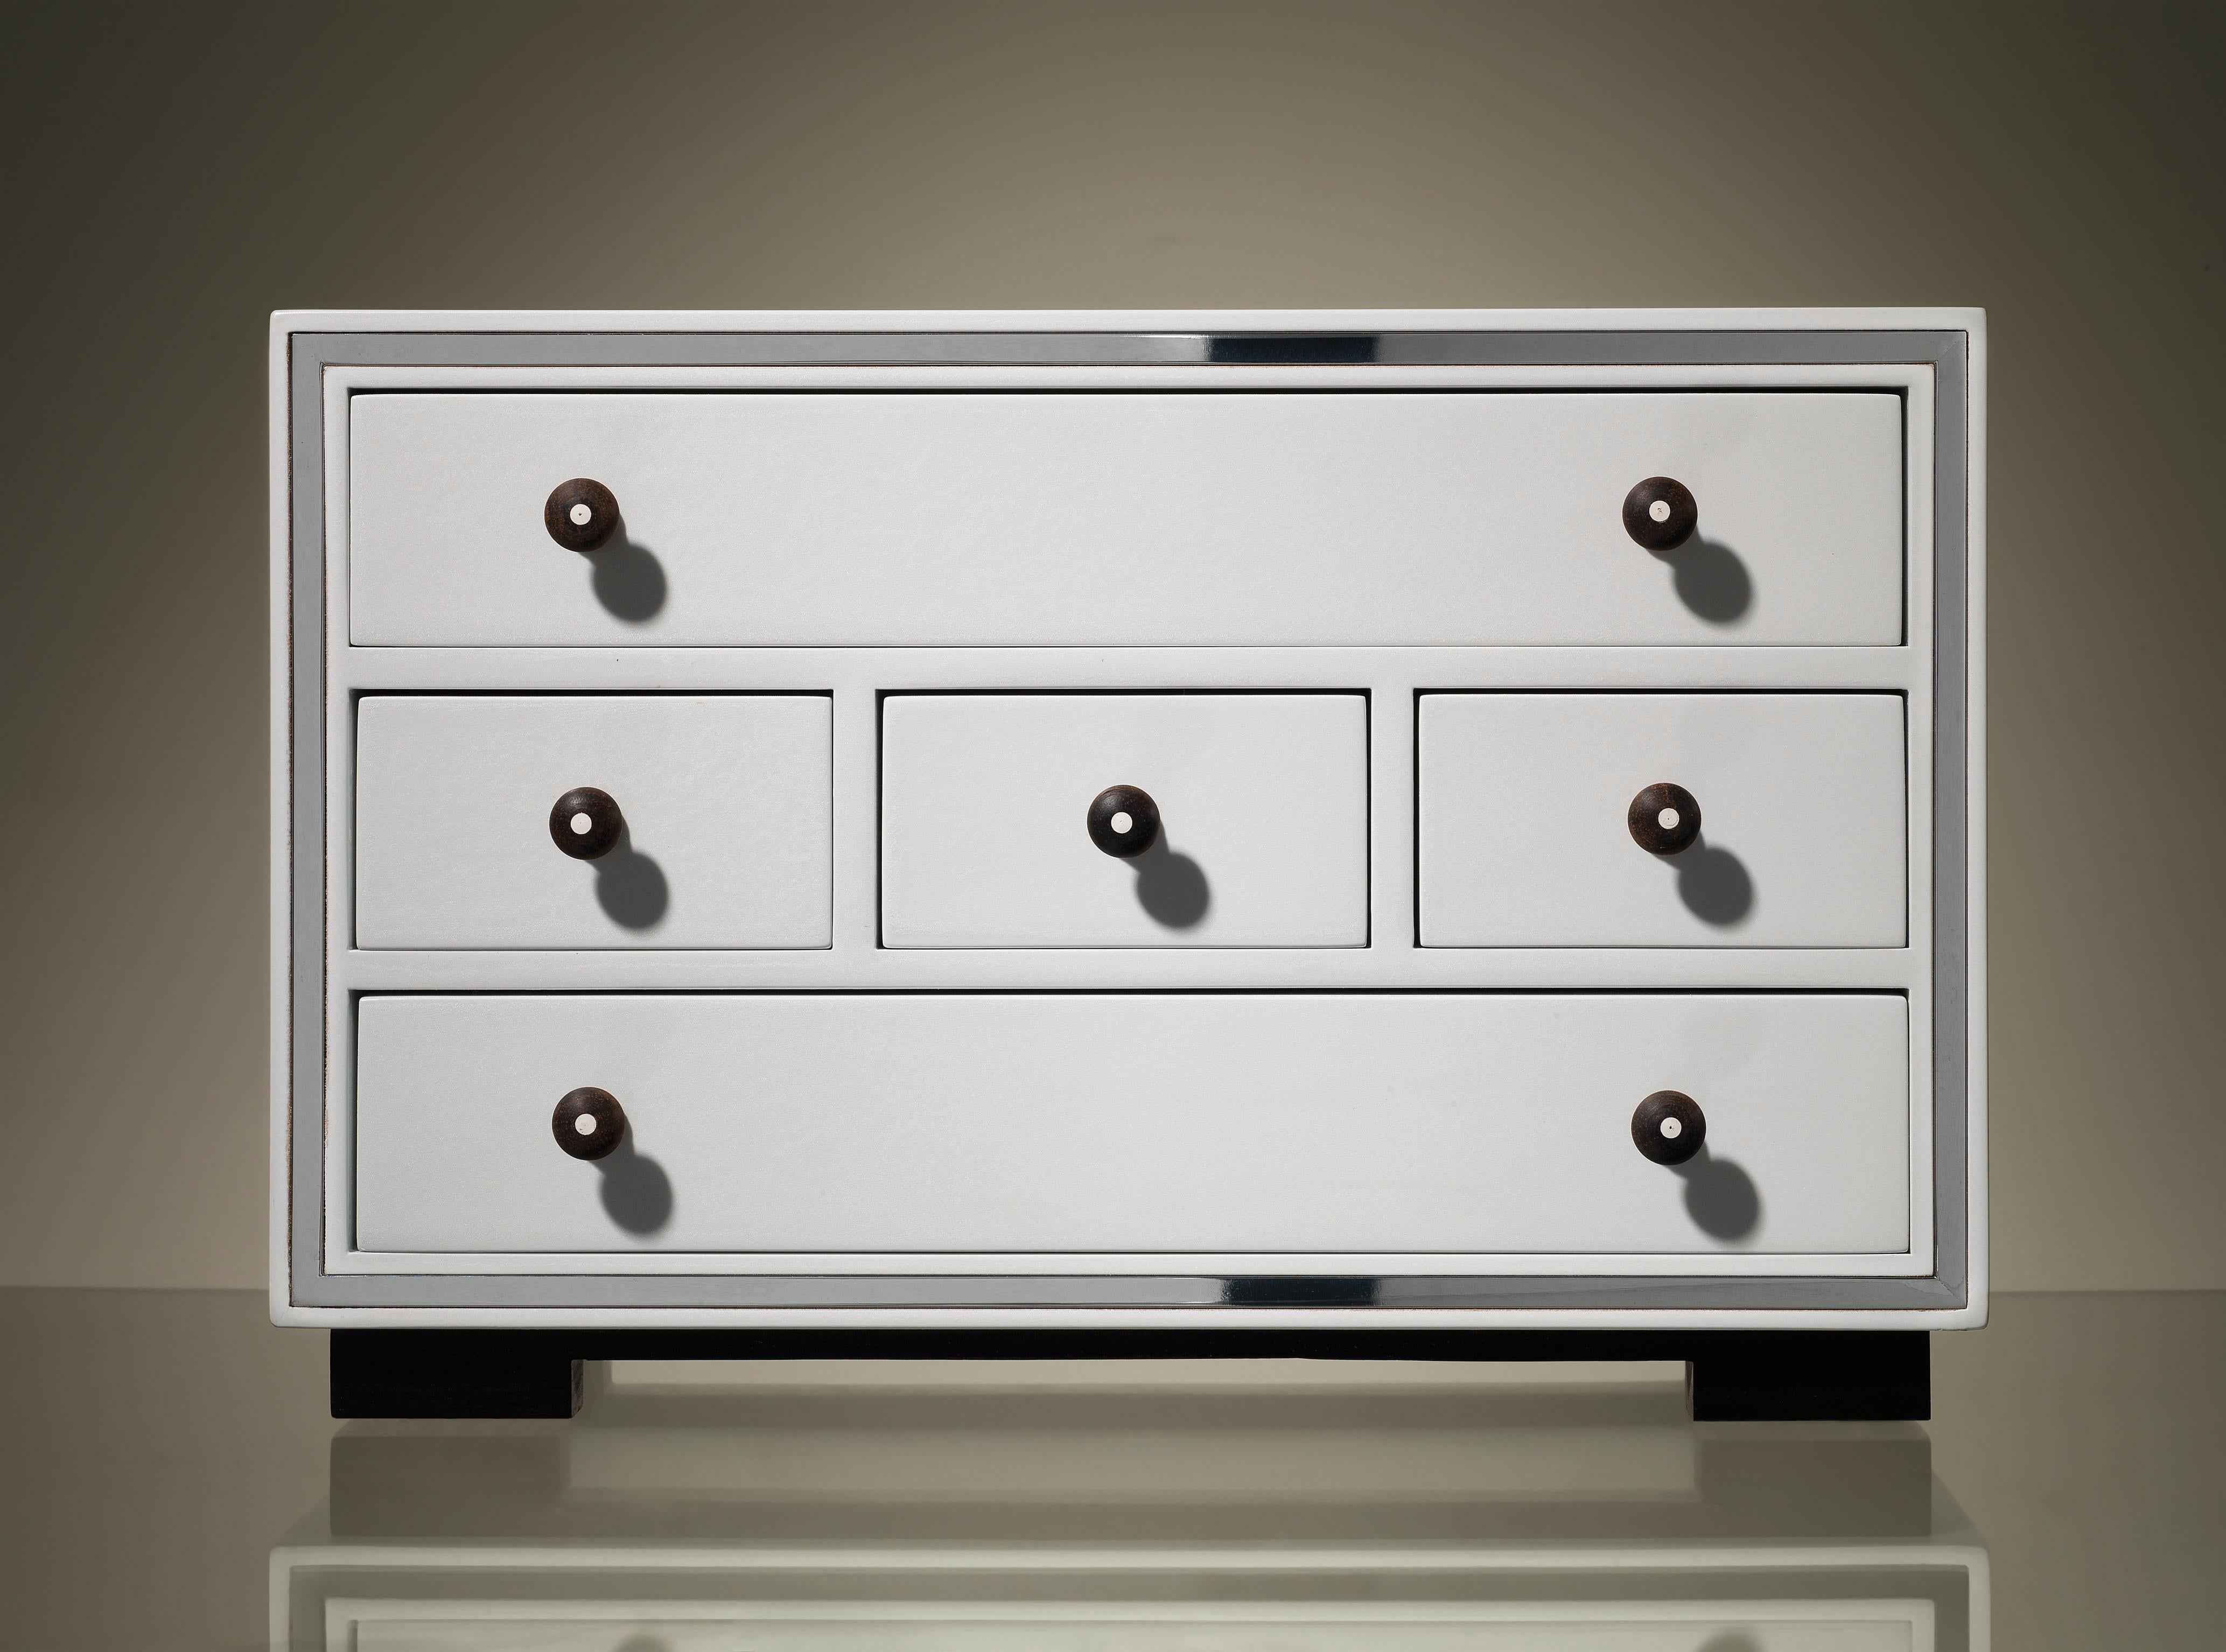 Chest of drawers in pearl lacquer with chromium metal trim, drawers lined inside (Lelievre upholstery), base and knobs in ebony

Bespoke / customizable
Identical shapes with different sizes and finishing’s.
All RAL colors available. (Mate / half